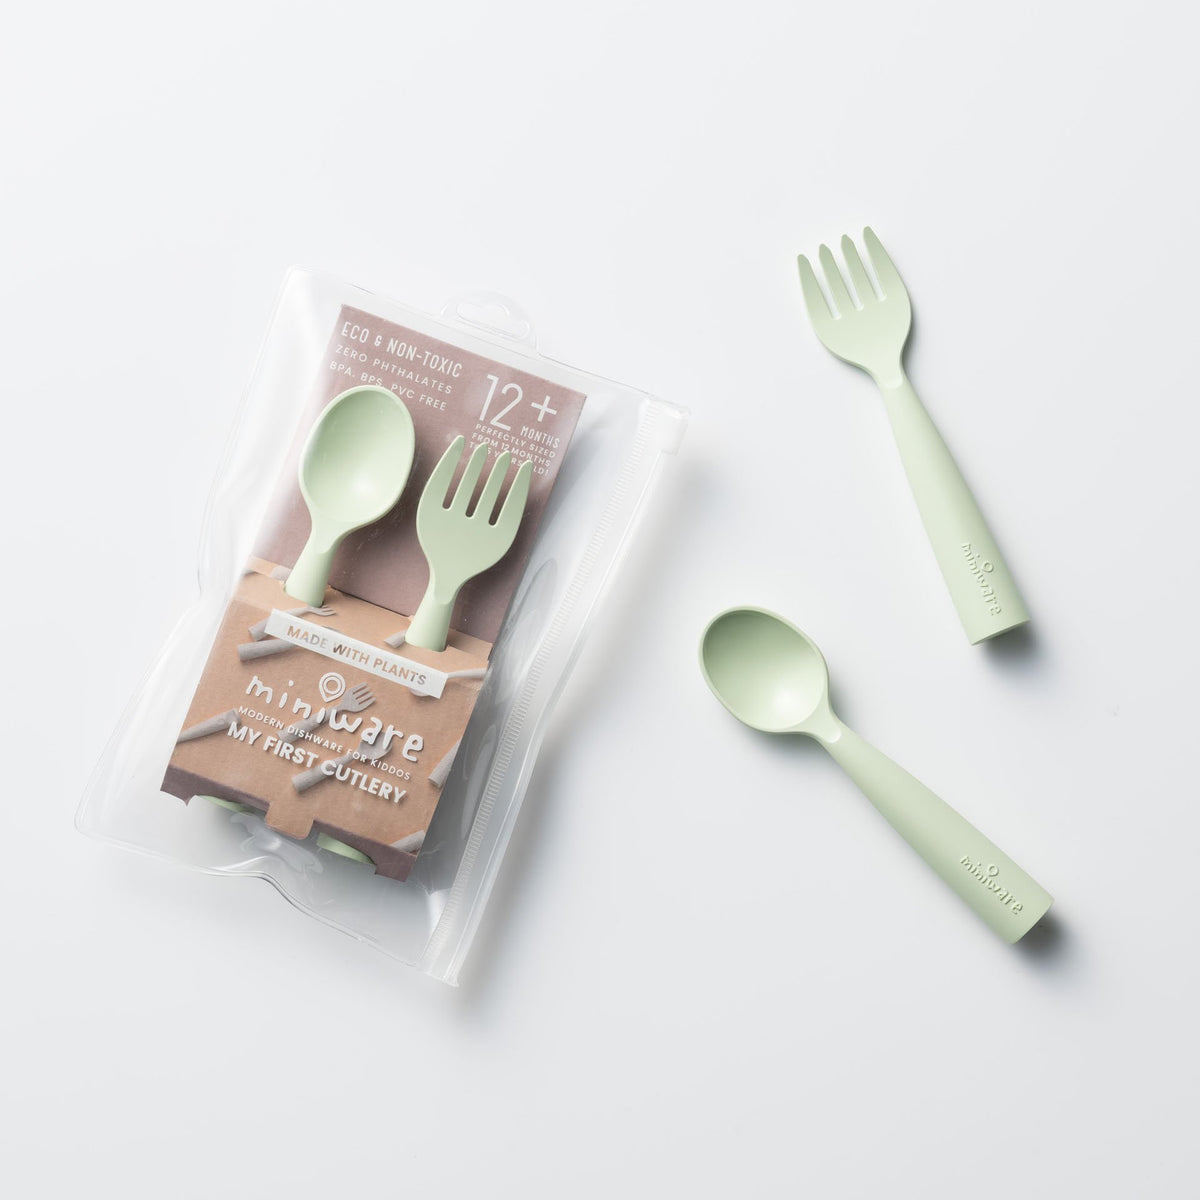 Miniware My First Cutlery Set in PLA Key Lime